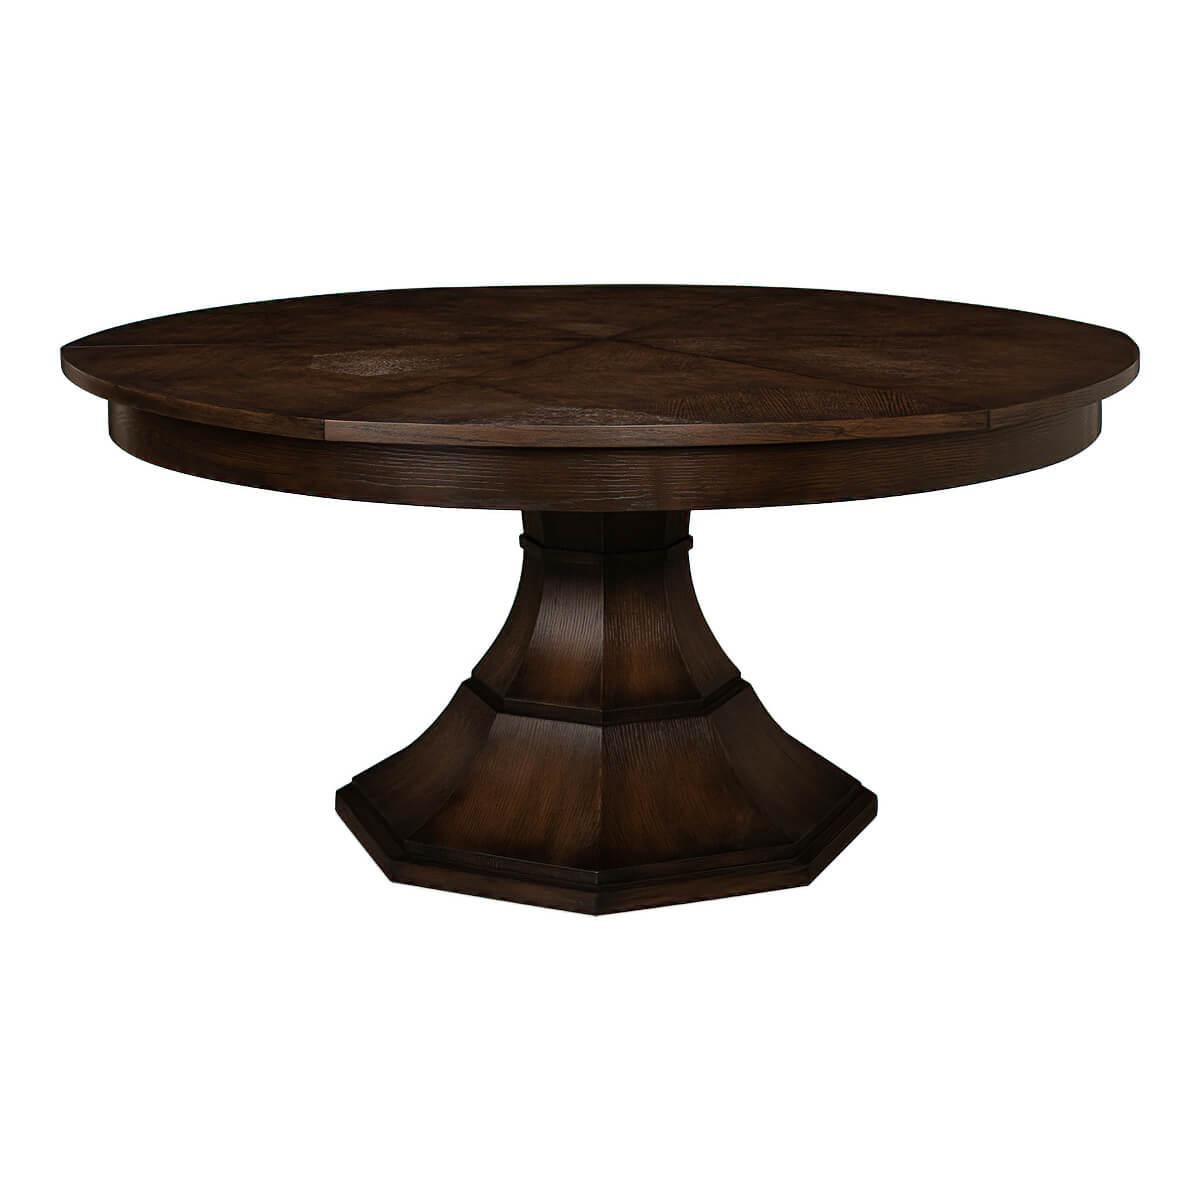 Modern round dining table modern round burnt brown oak veneered extension dining table with self-storing leaves, on a tapered column form pedestal base.

Open dimensions: 70